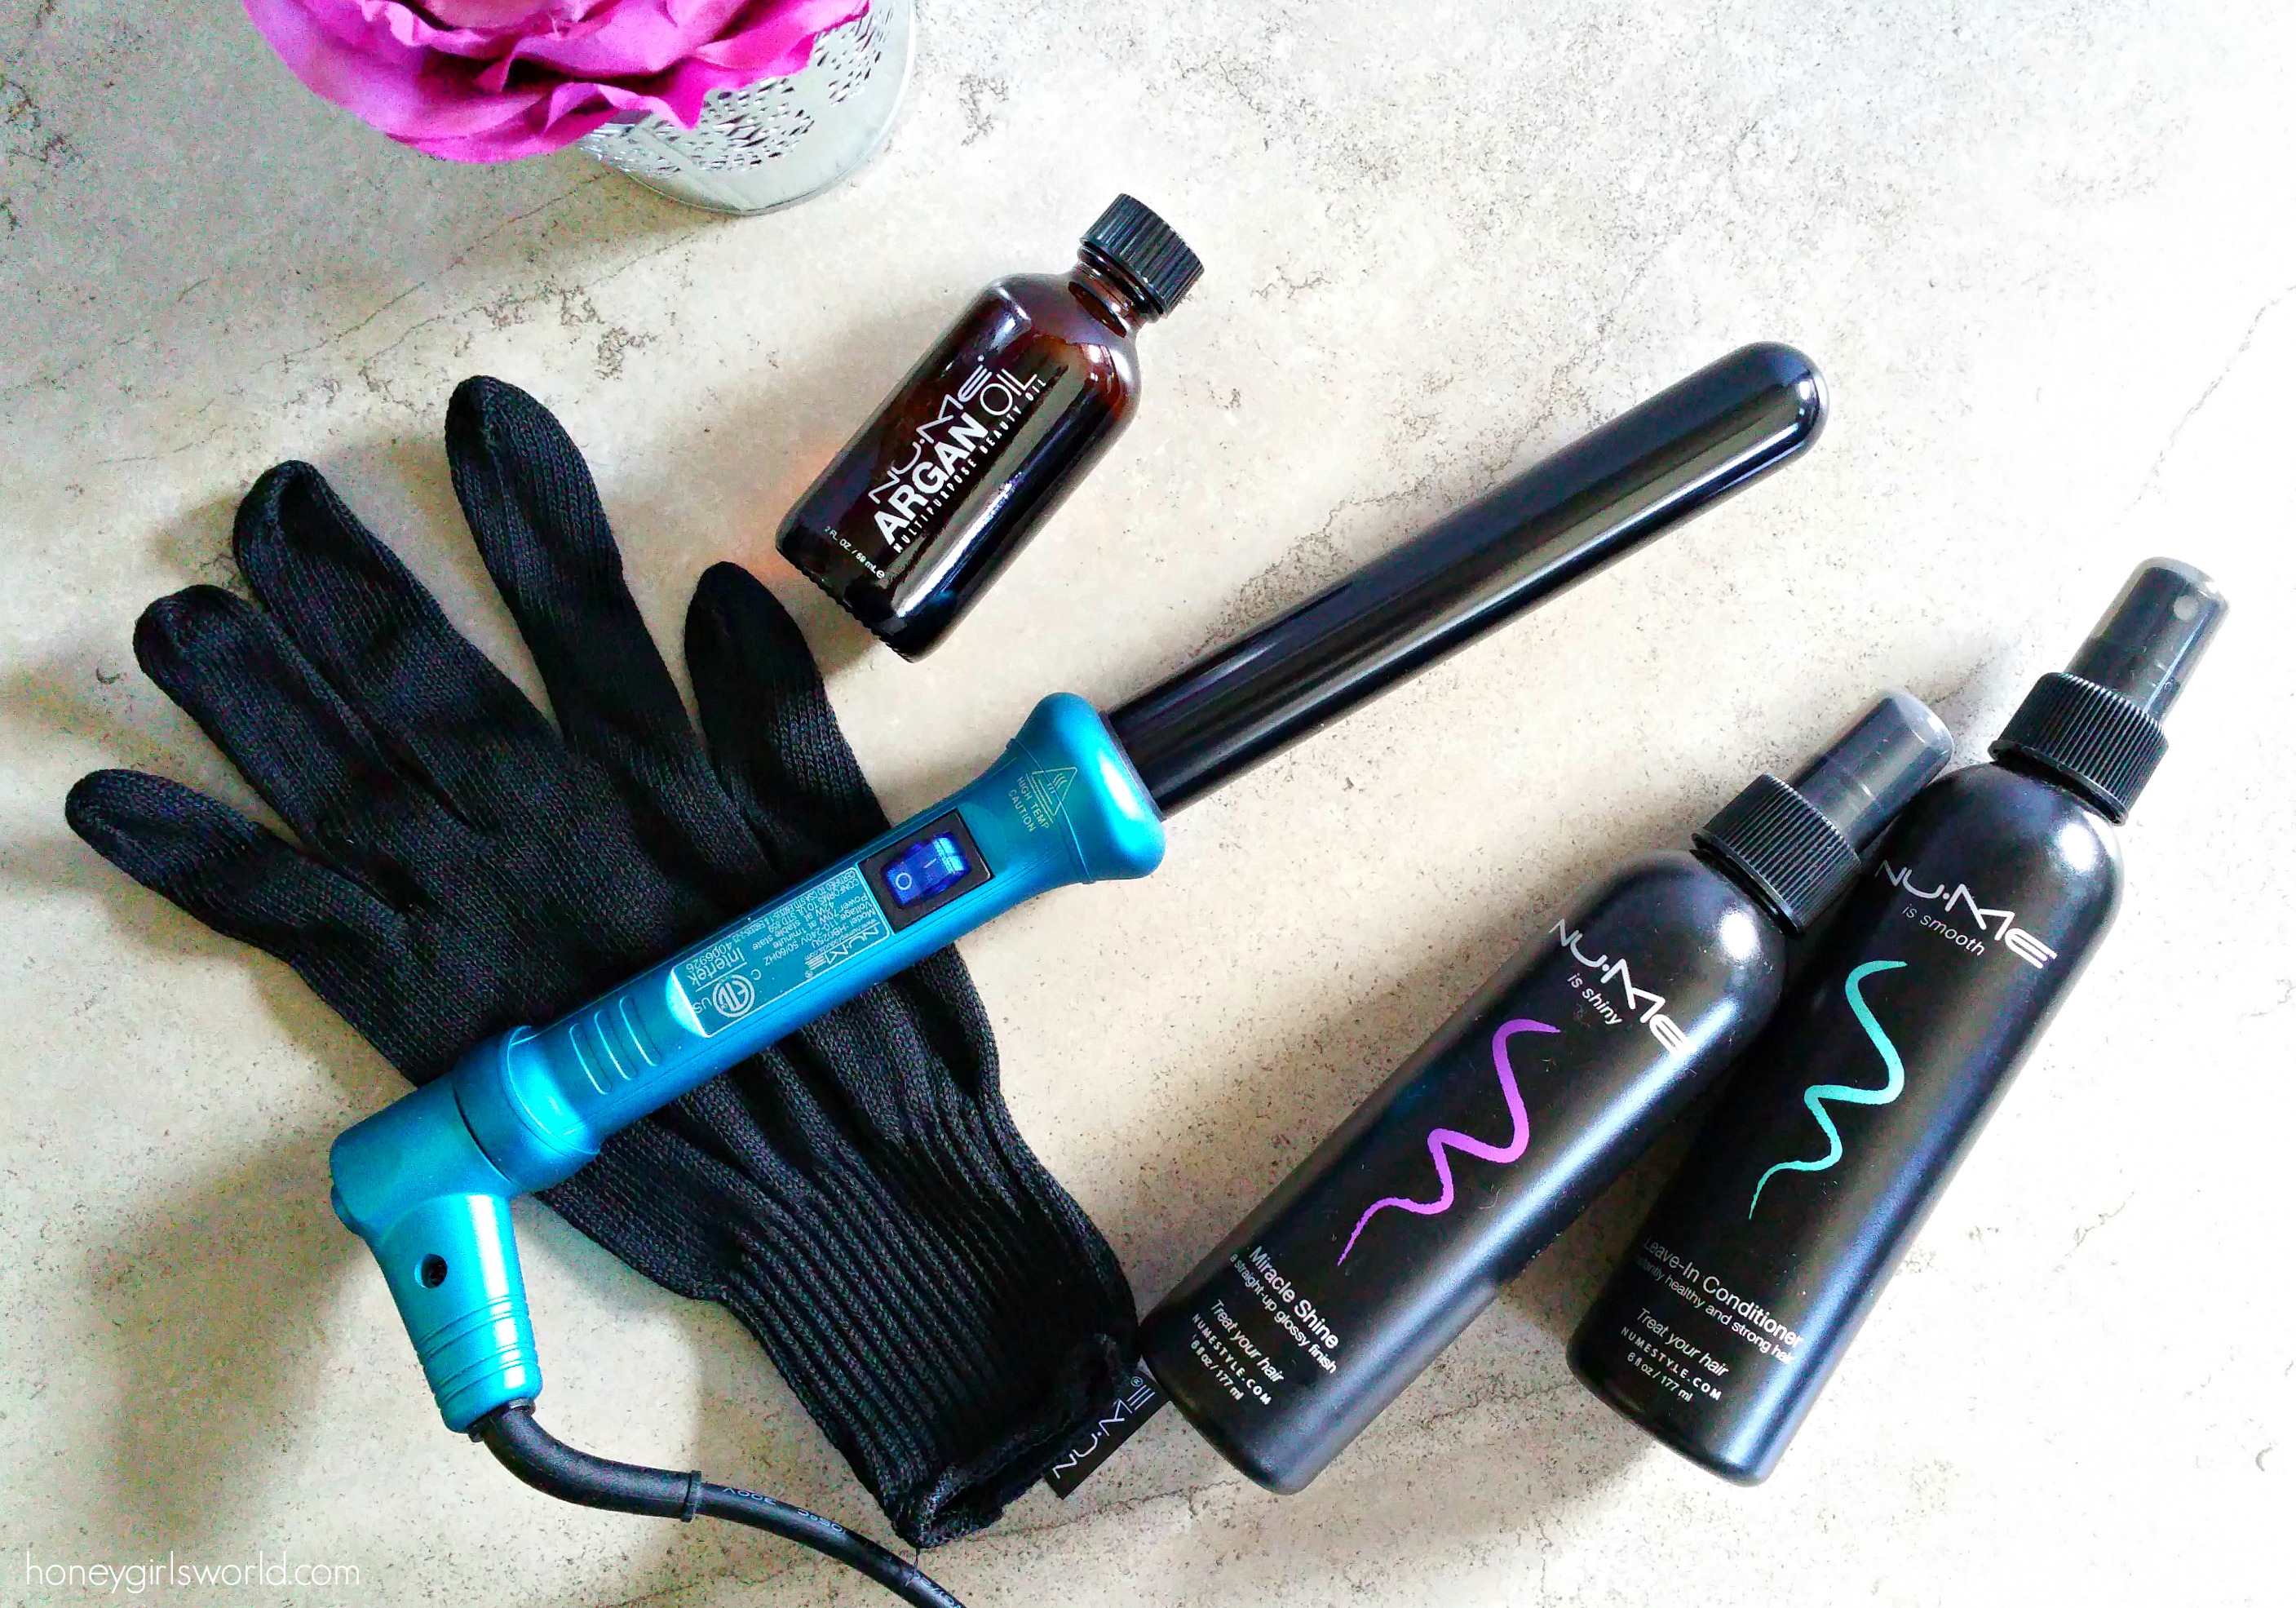 curly hair, curly hair don't care, Nume, Nume Products, curling wand, hair, curls, easy curls, nume tools, nume curling wand, discount, 